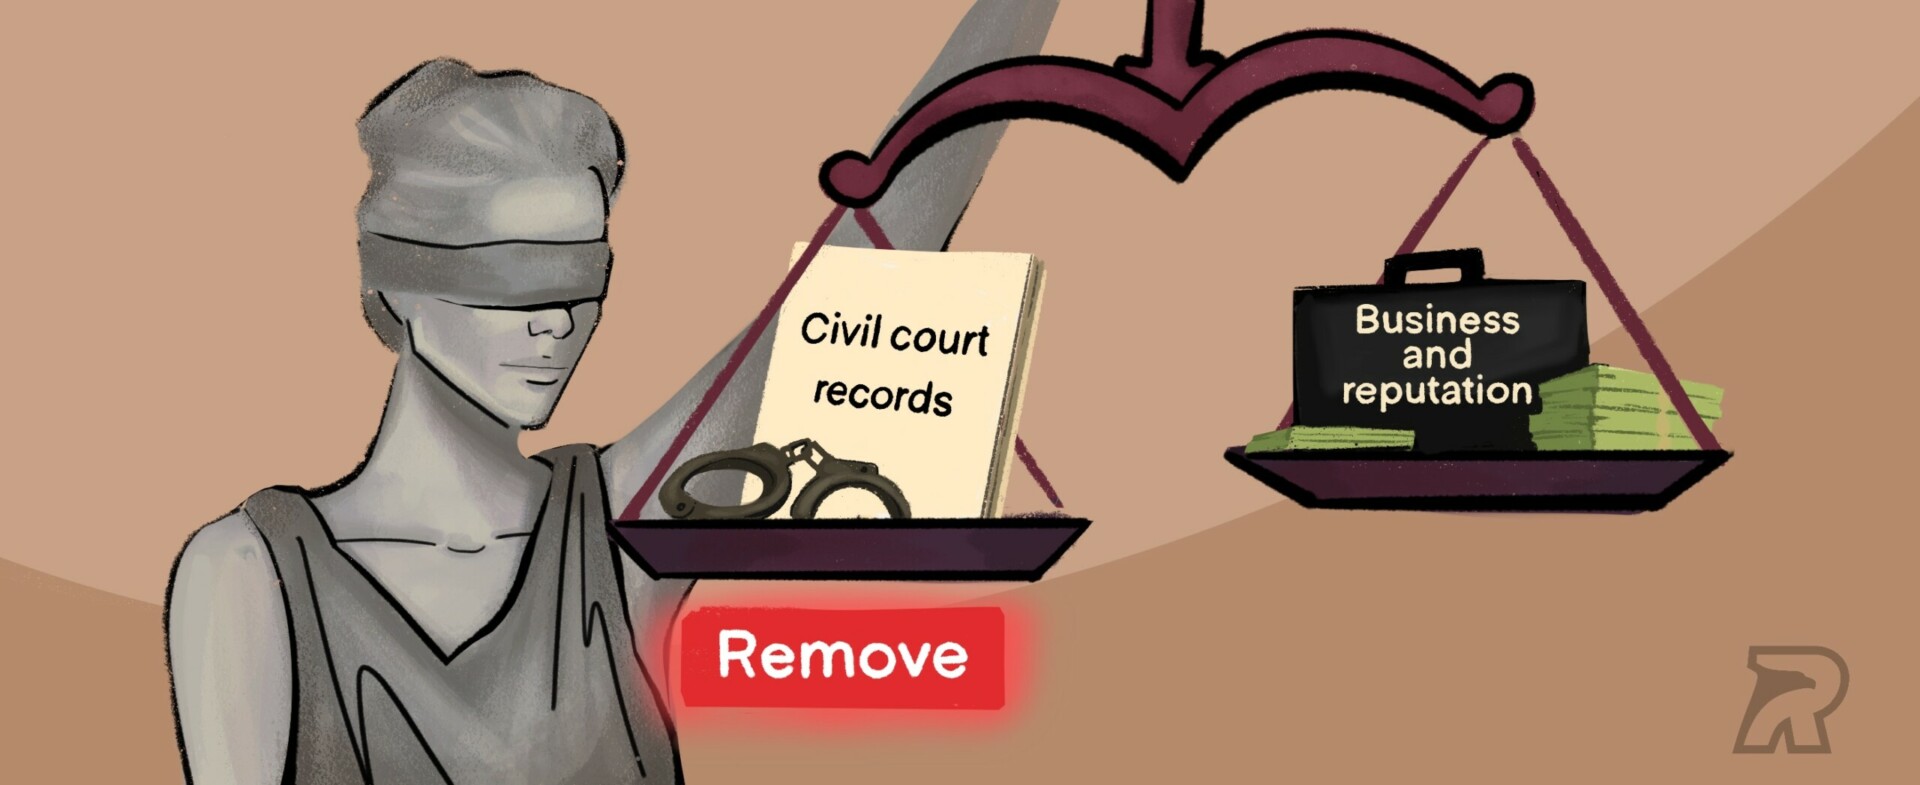 How to Remove Civil Court Records